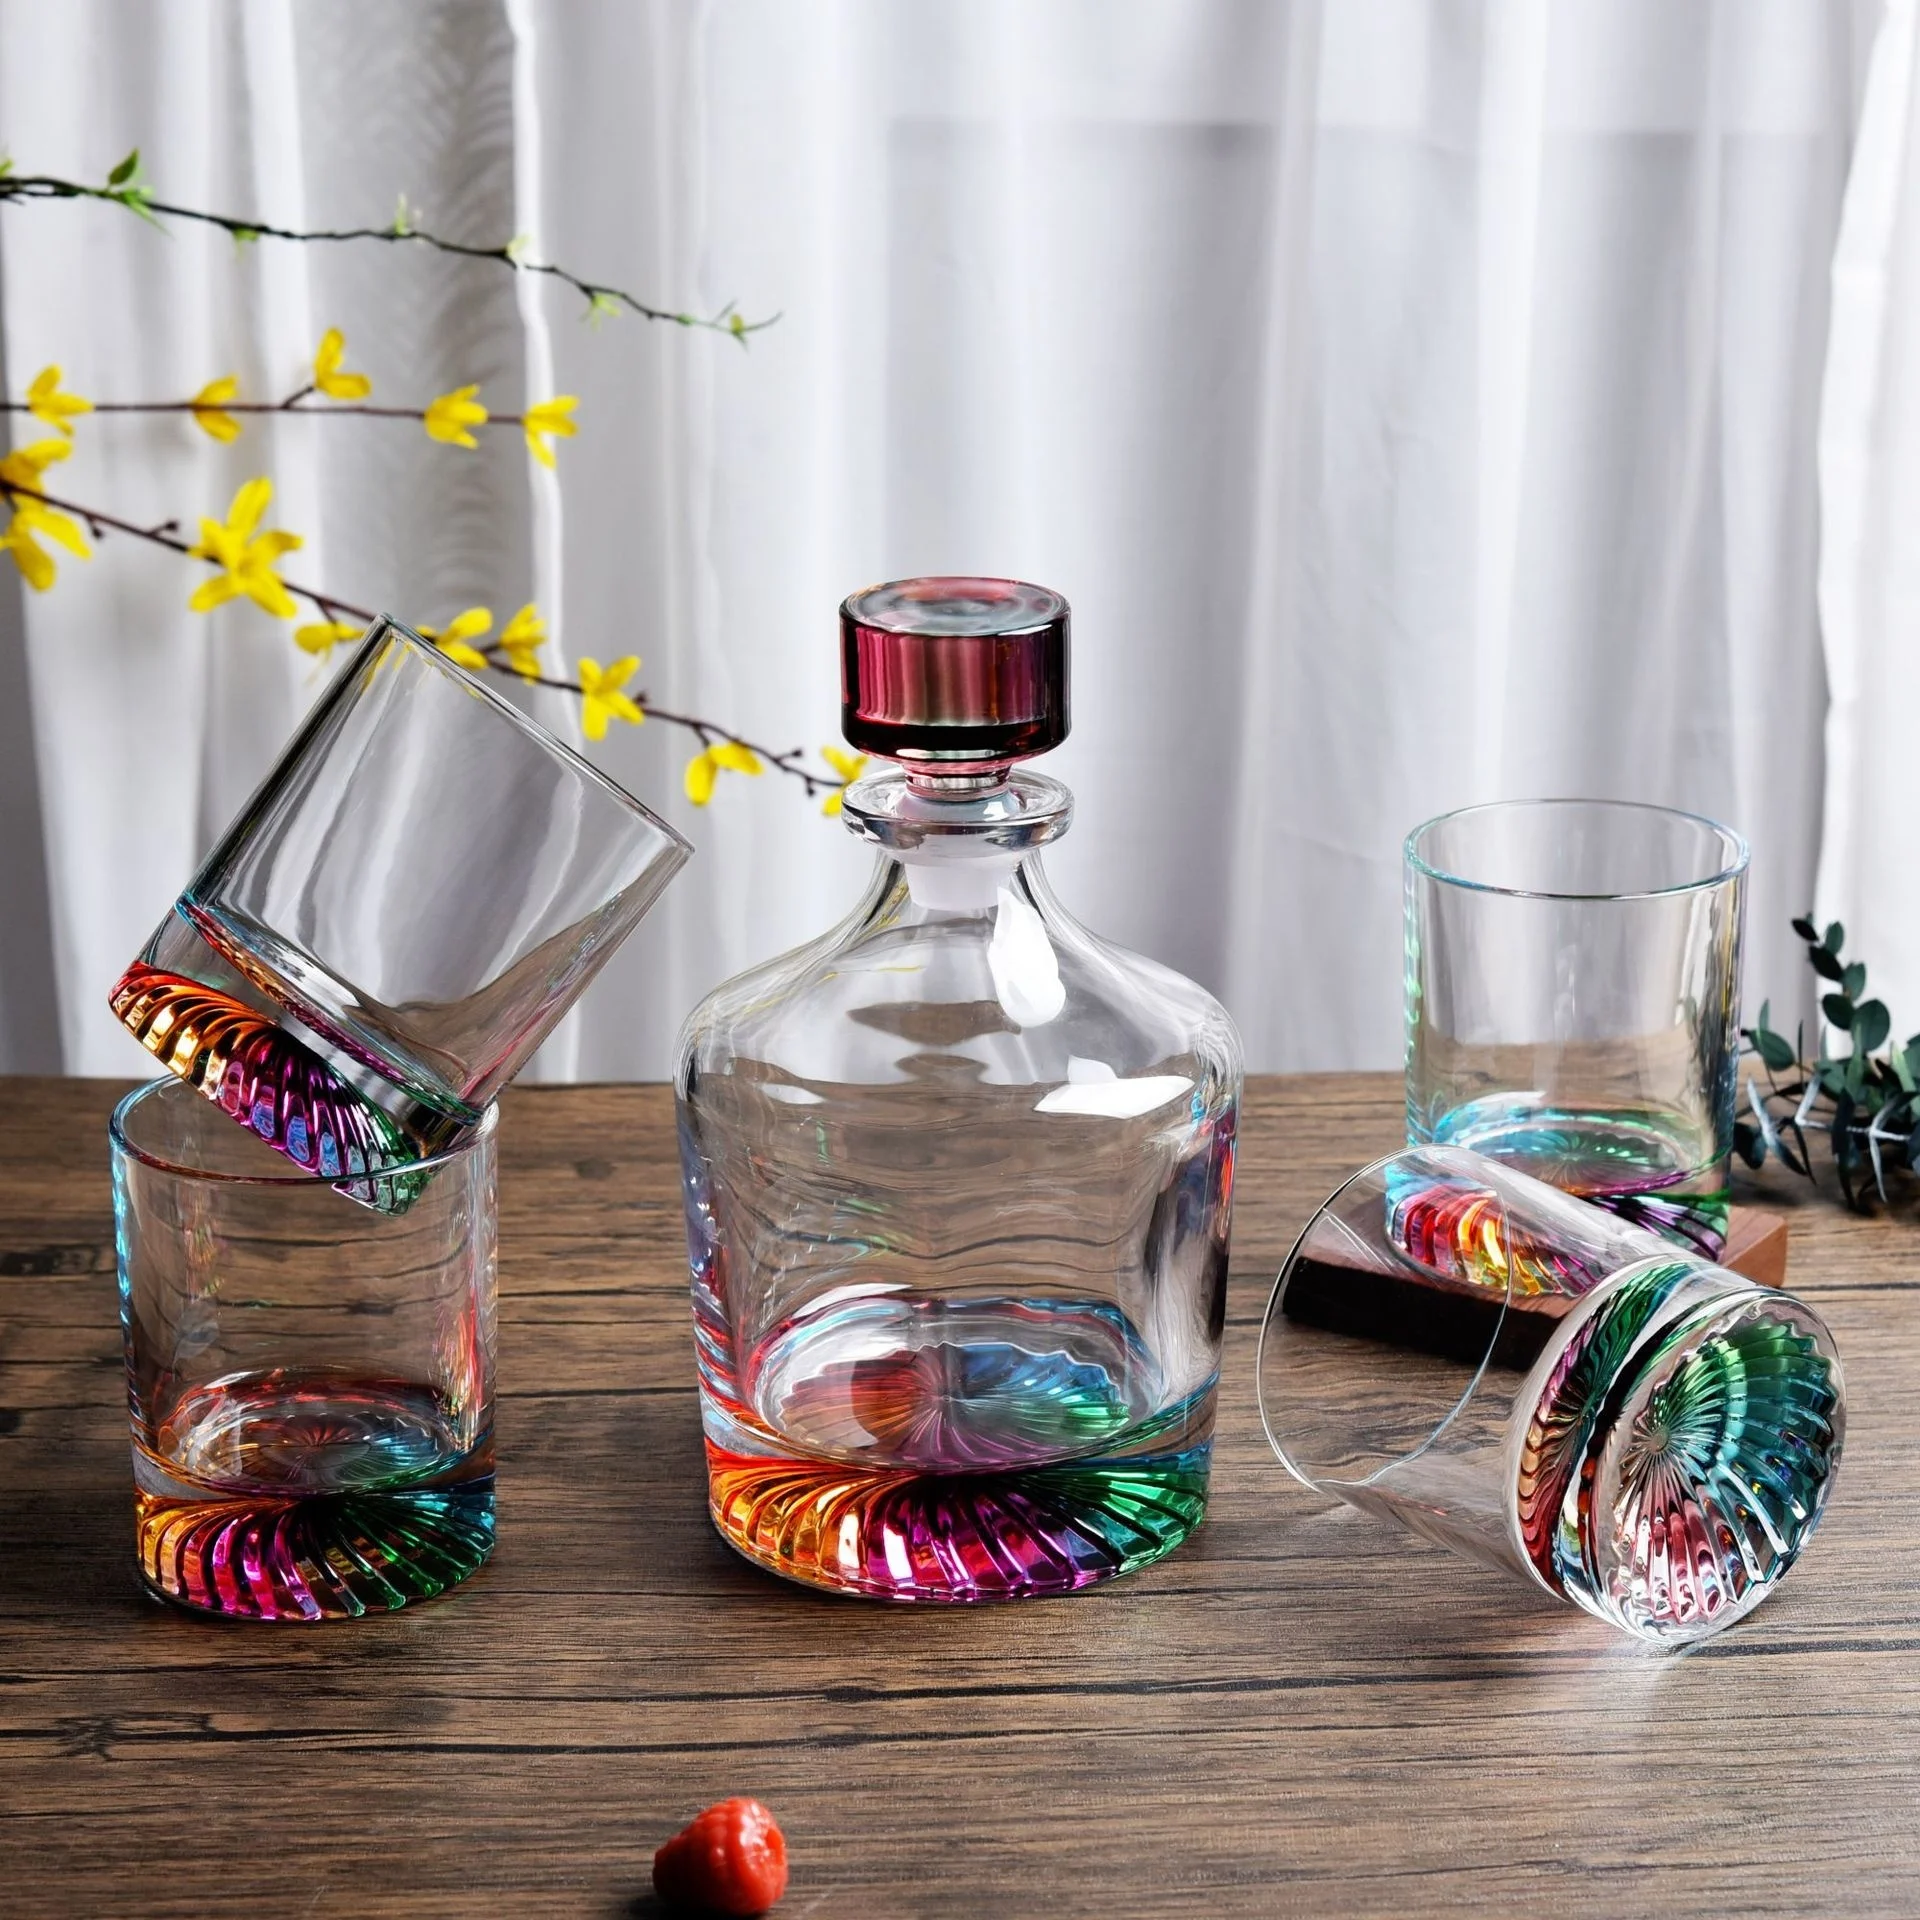 https://ae01.alicdn.com/kf/Sf0f2cbd091904b42b51e97c8f08c4628q/5-Pcs-City-Neon-Crystal-Wine-Suit-Best-Barware-Gifts-Whisky-Partner-Alcohol-Drink-Glass-Set.jpg